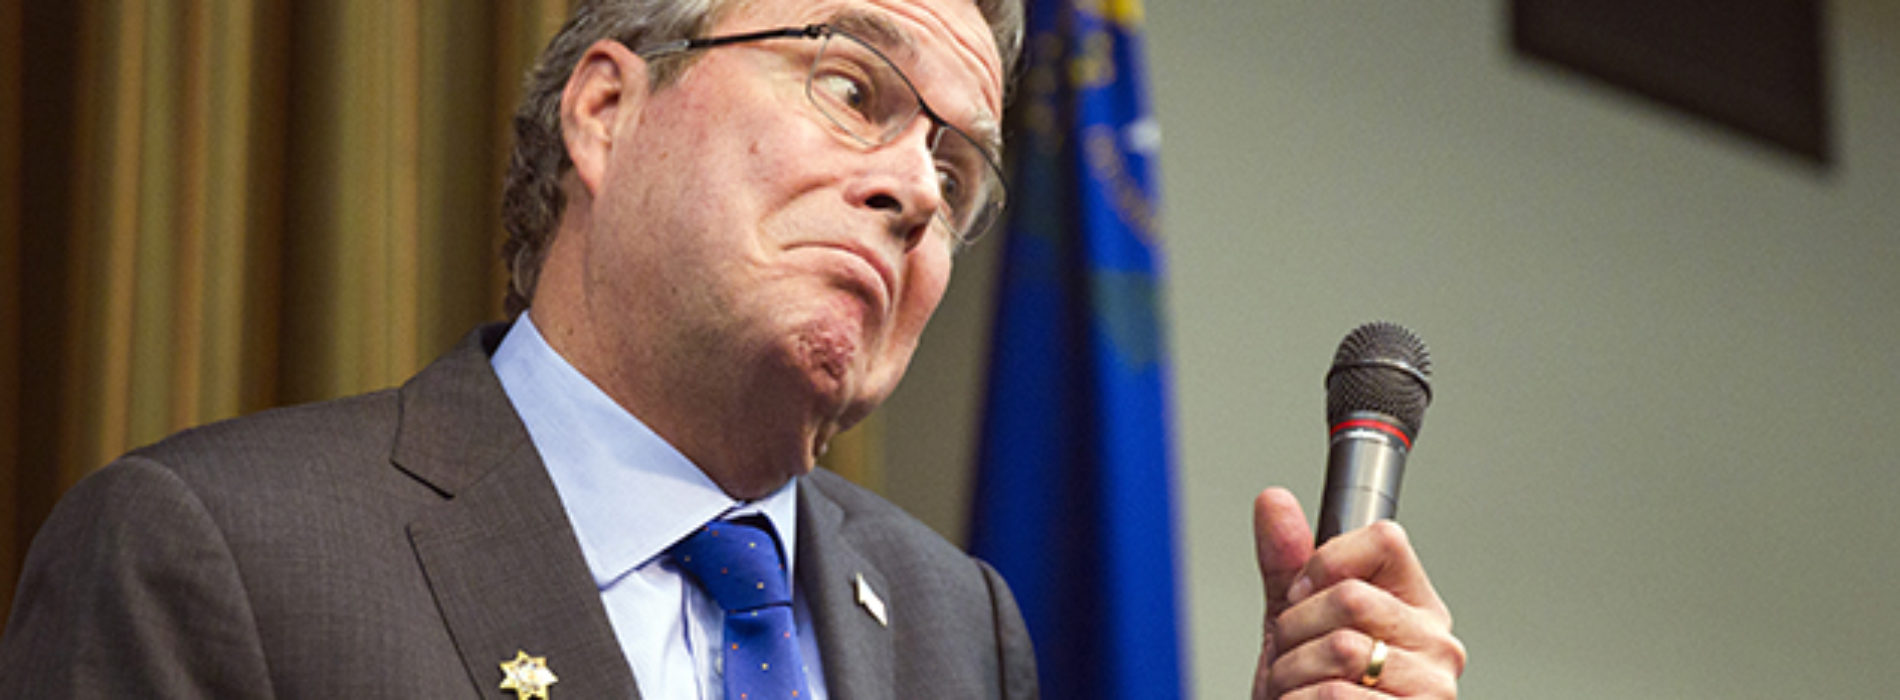 Episode #21: Is Jeb! Going to Get the Last Laugh?